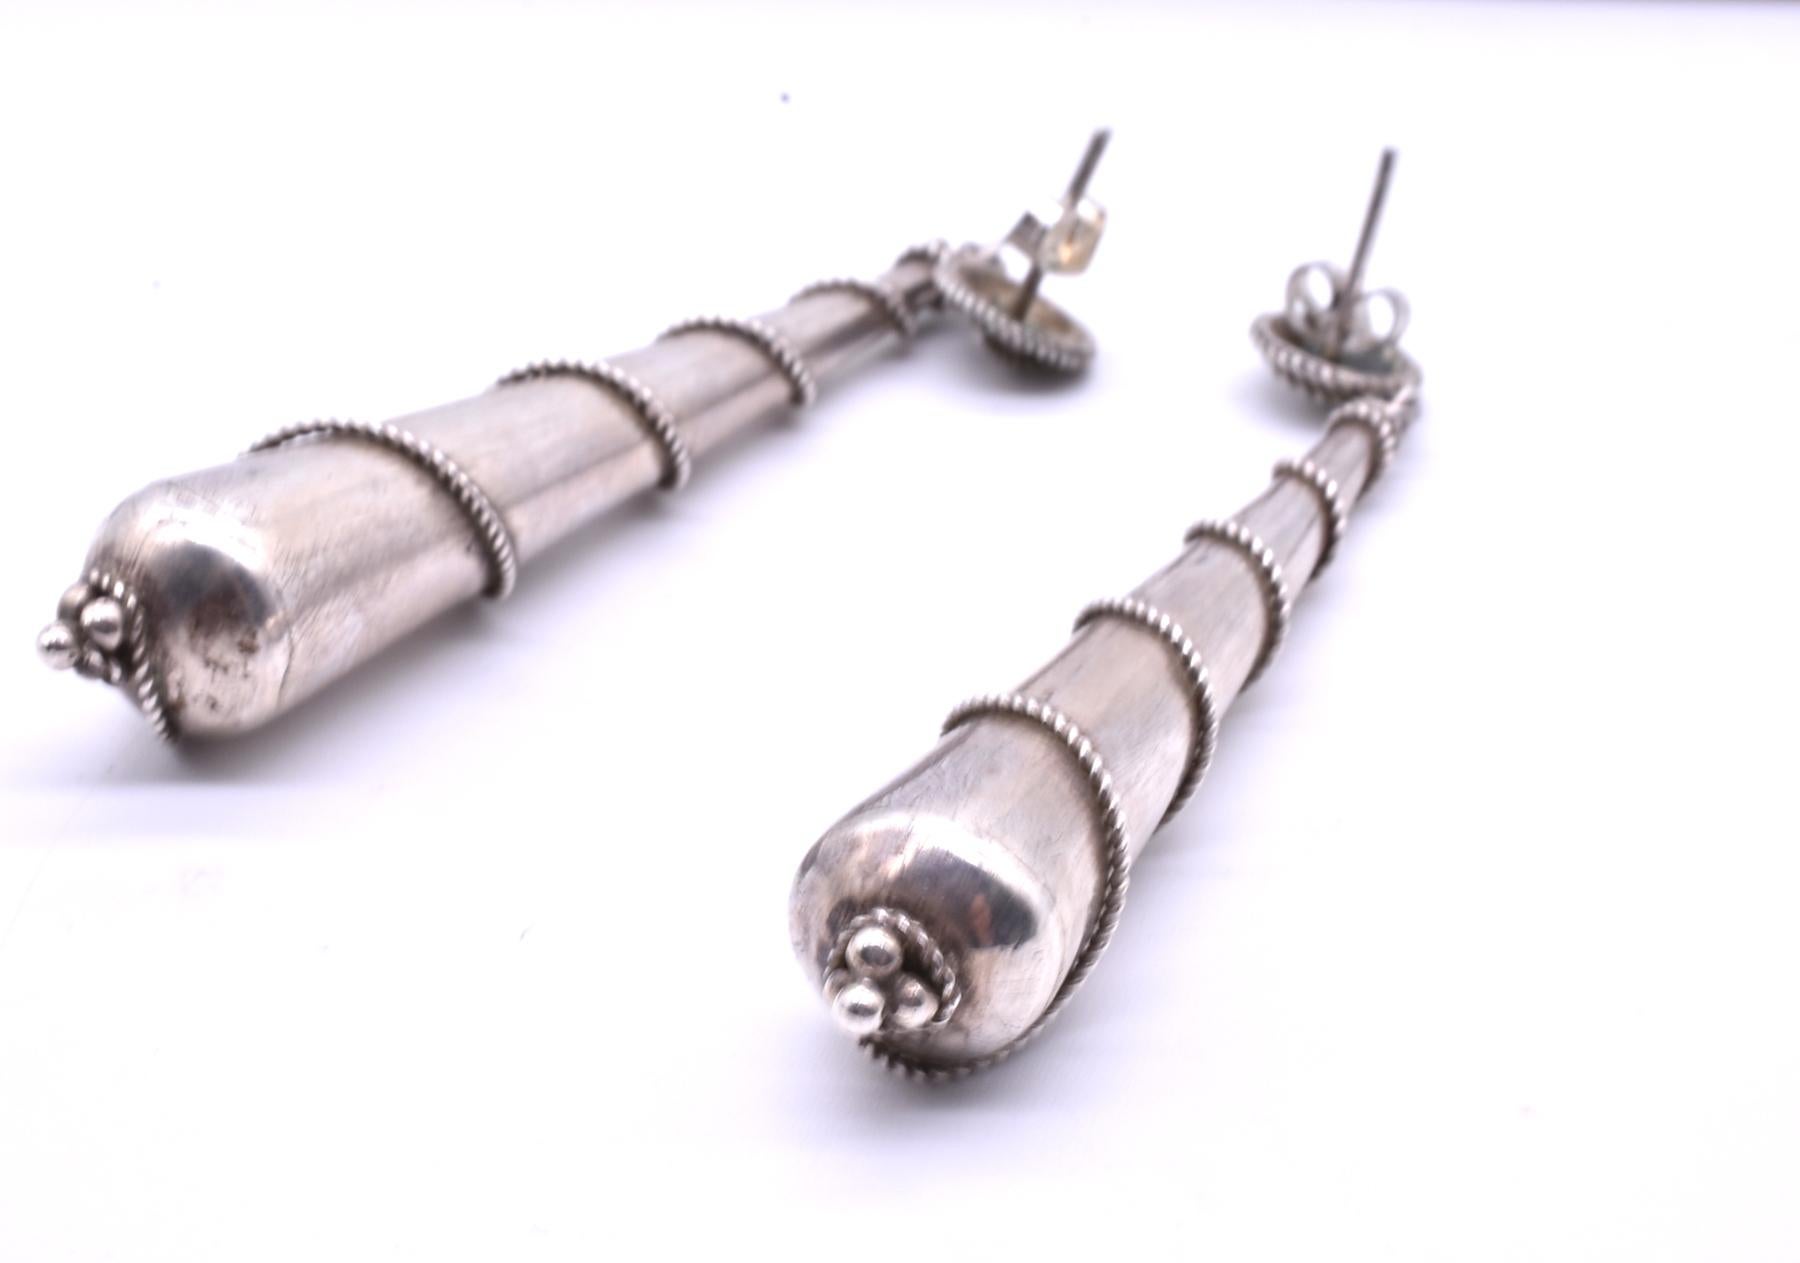 C1860 sterling silver pendeloque earrings,  over three inches long, make a statement no matter the occasion. The silver earrings have a thin fluted silver band wrapped round and round culminating in a small finial at the bottom. The thin silver